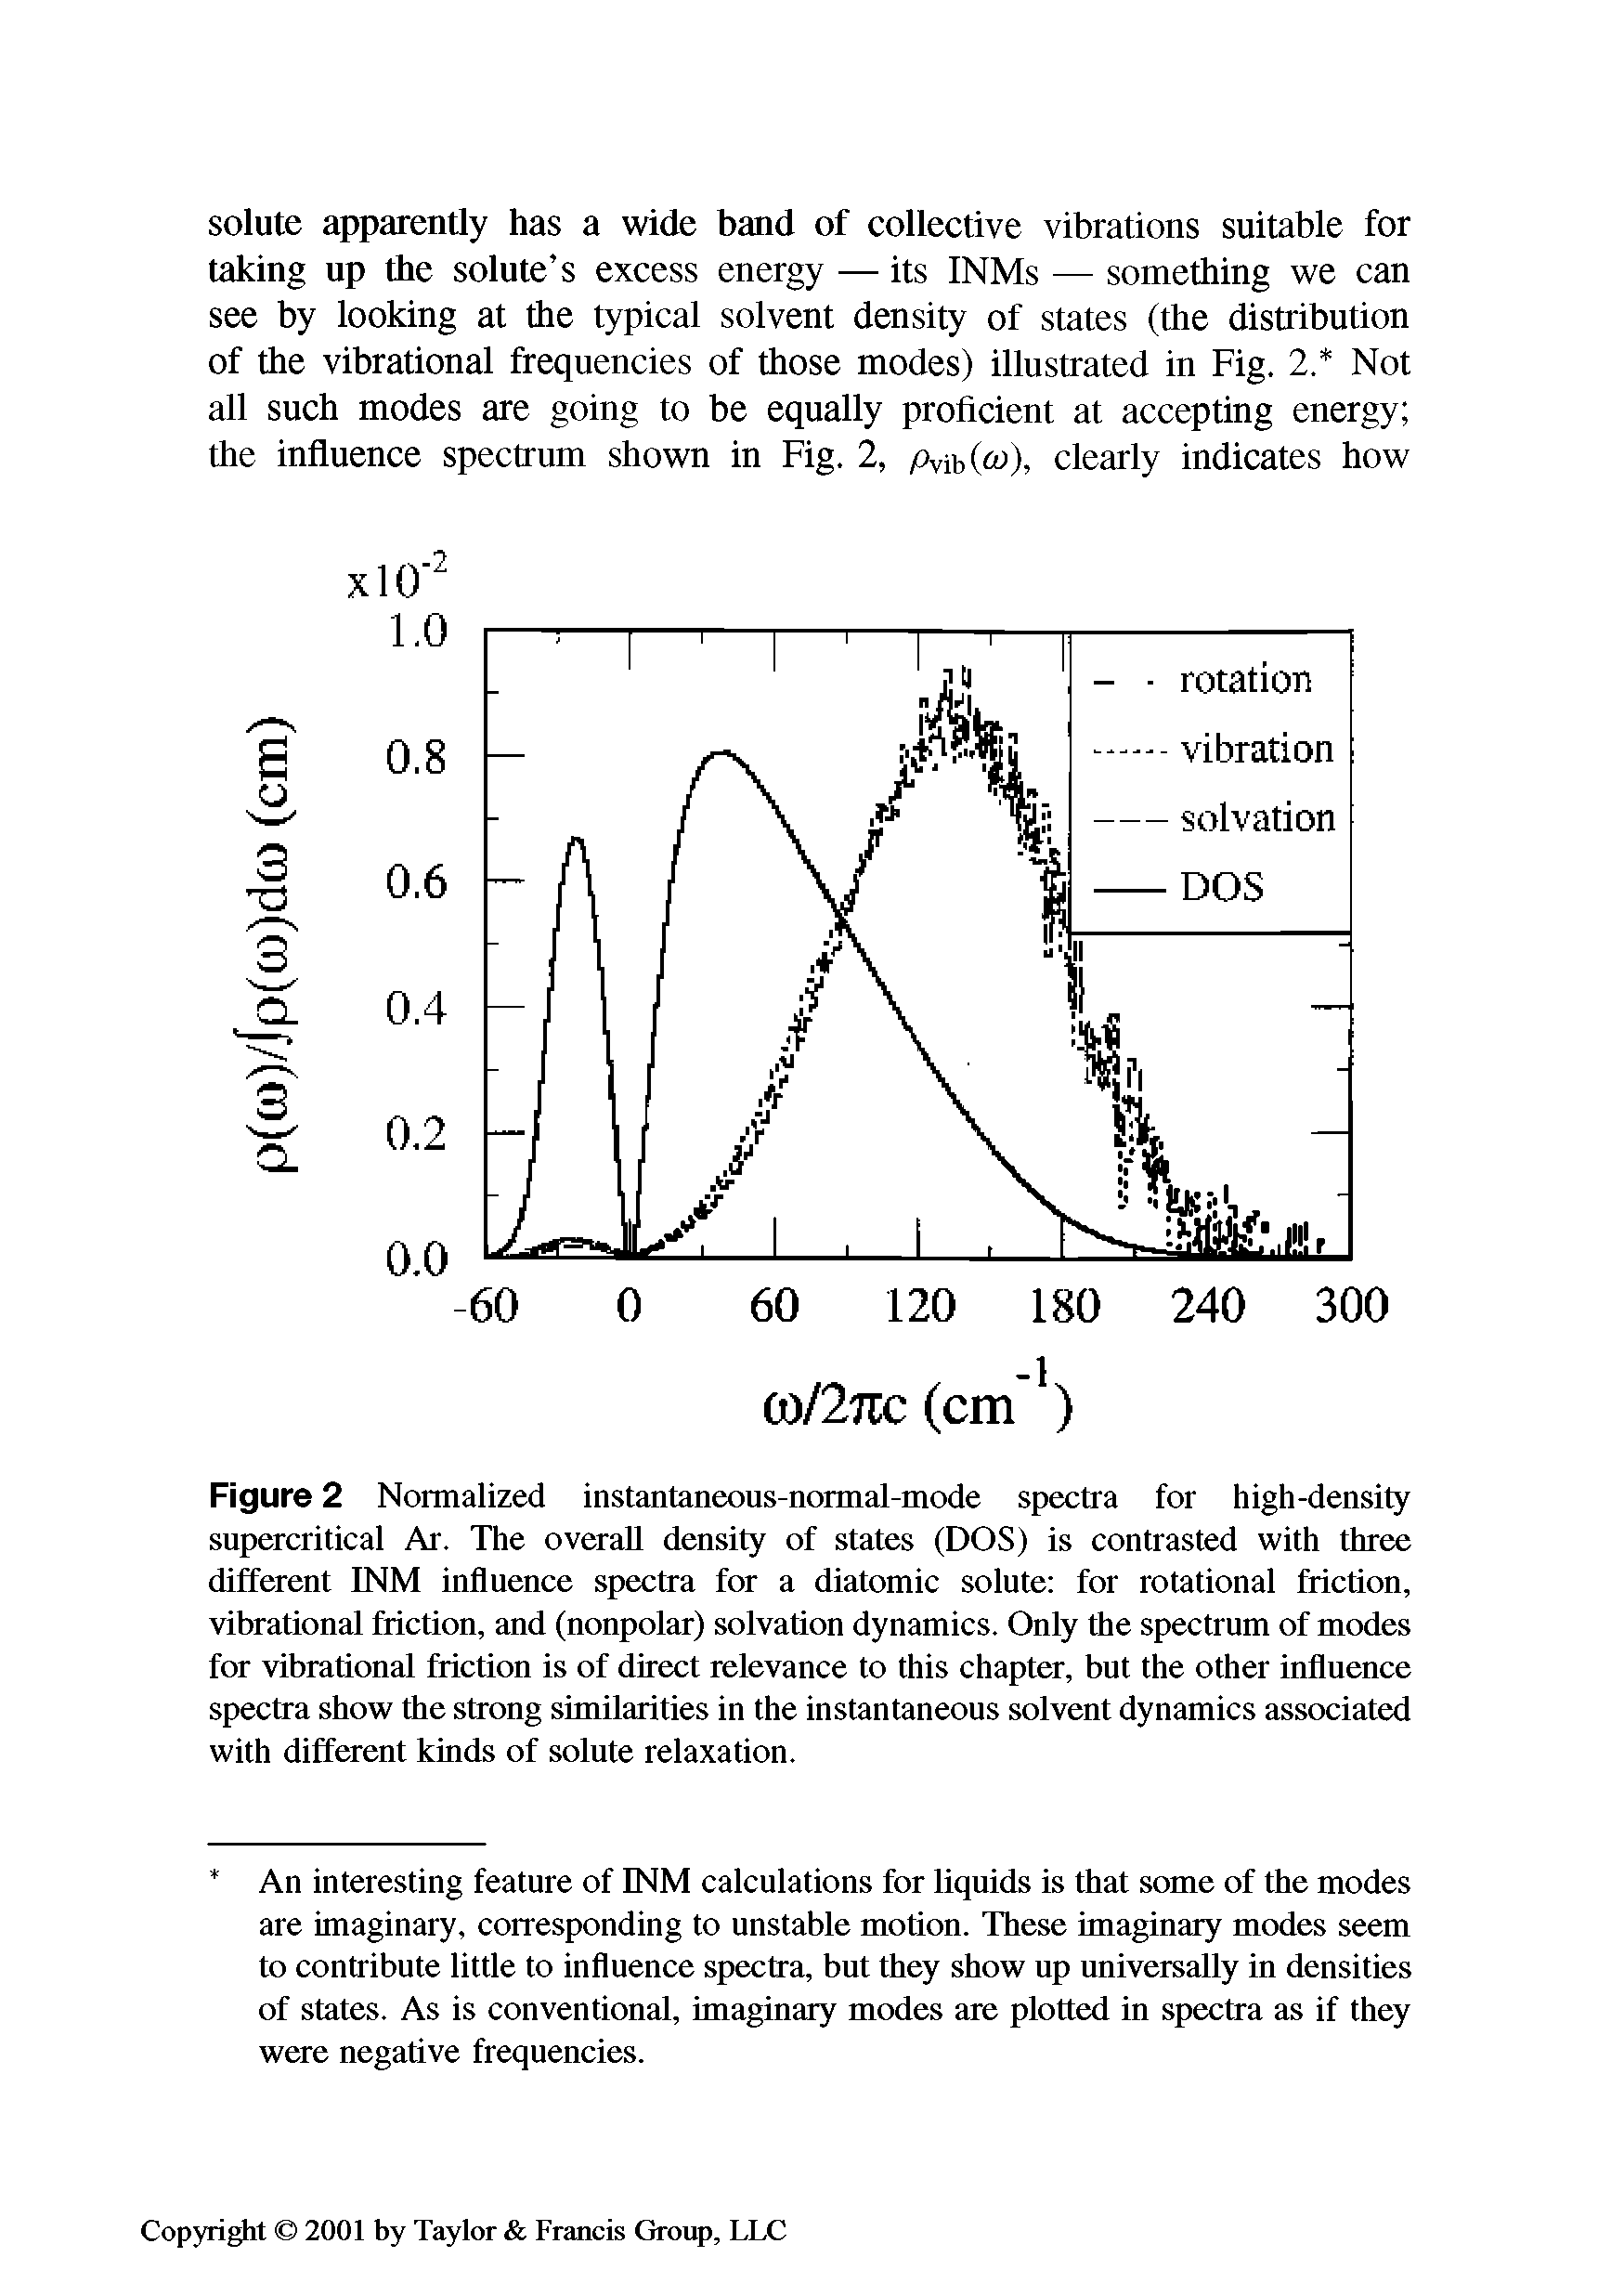 Figure 2 Normalized instantaneous-normal-mode spectra for high-density supercritical Ar. The overall density of states (DOS) is contrasted with three different INM influence spectra for a diatomic solute for rotational friction, vibrational friction, and (nonpolar) solvation dynamics. Only the spectrum of modes for vibrational friction is of direct relevance to this chapter, but the other influence spectra show the strong similarities in the instantaneous solvent dynamics associated with different kinds of solute relaxation.